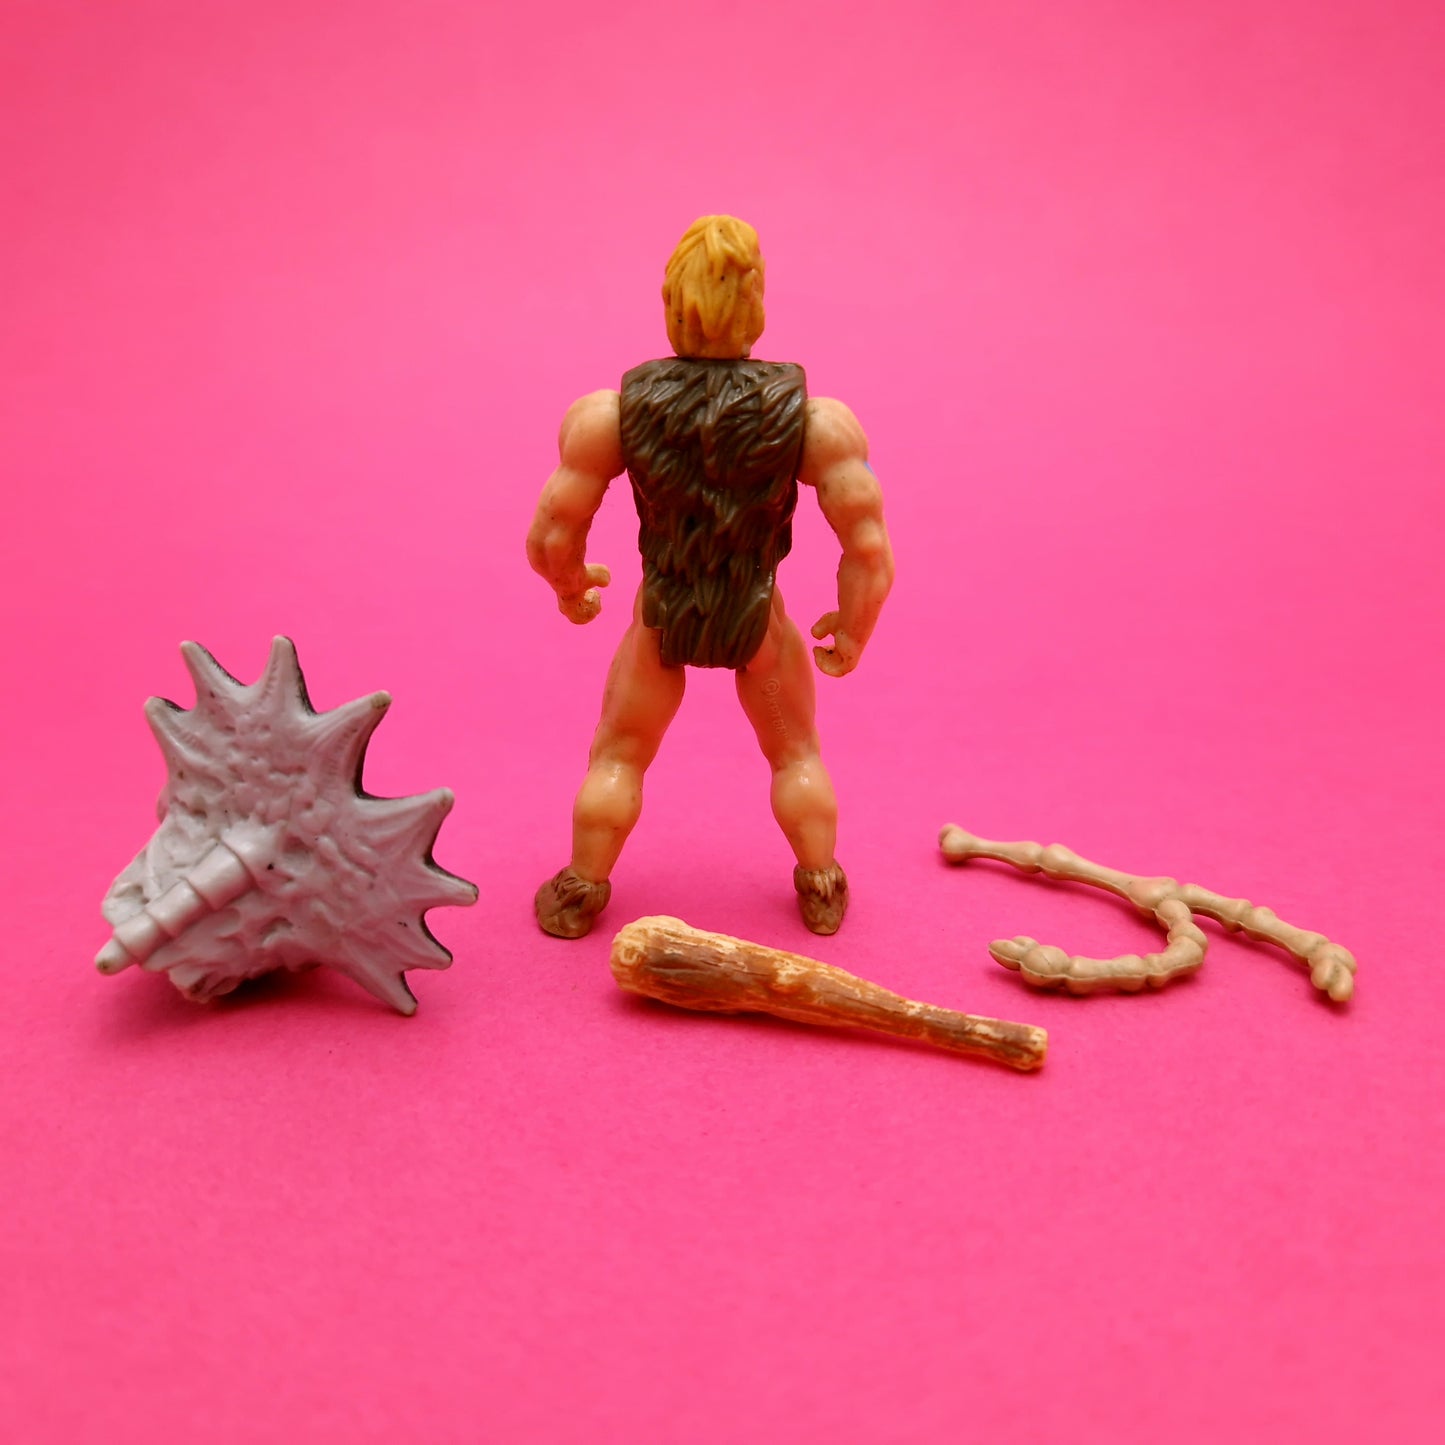 BONE AGE ☆ TUND THE THUNDER Vintage Action Figure ☆ Near Complete Kenner